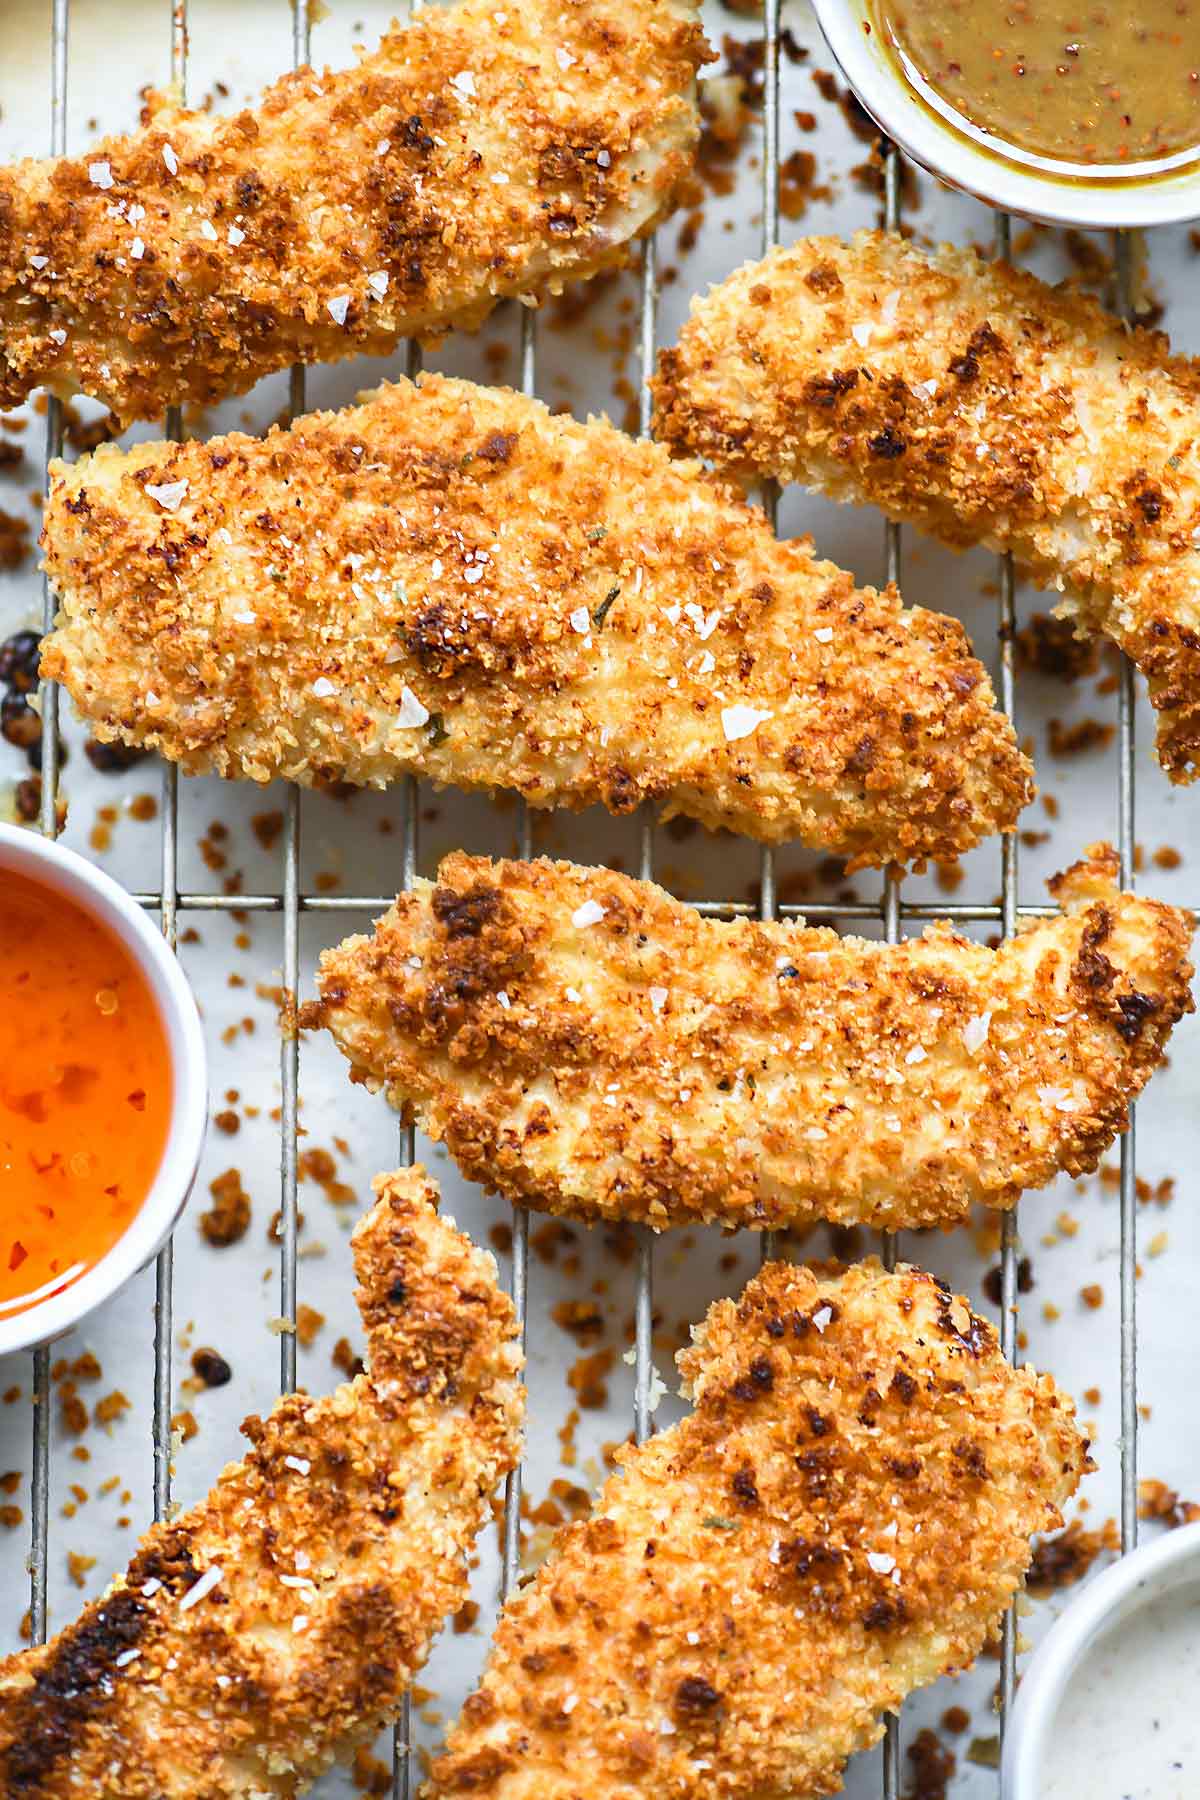 Crispy buttermilk chicken tenders 15 Delicious Air Fryer Recipes to Try Now